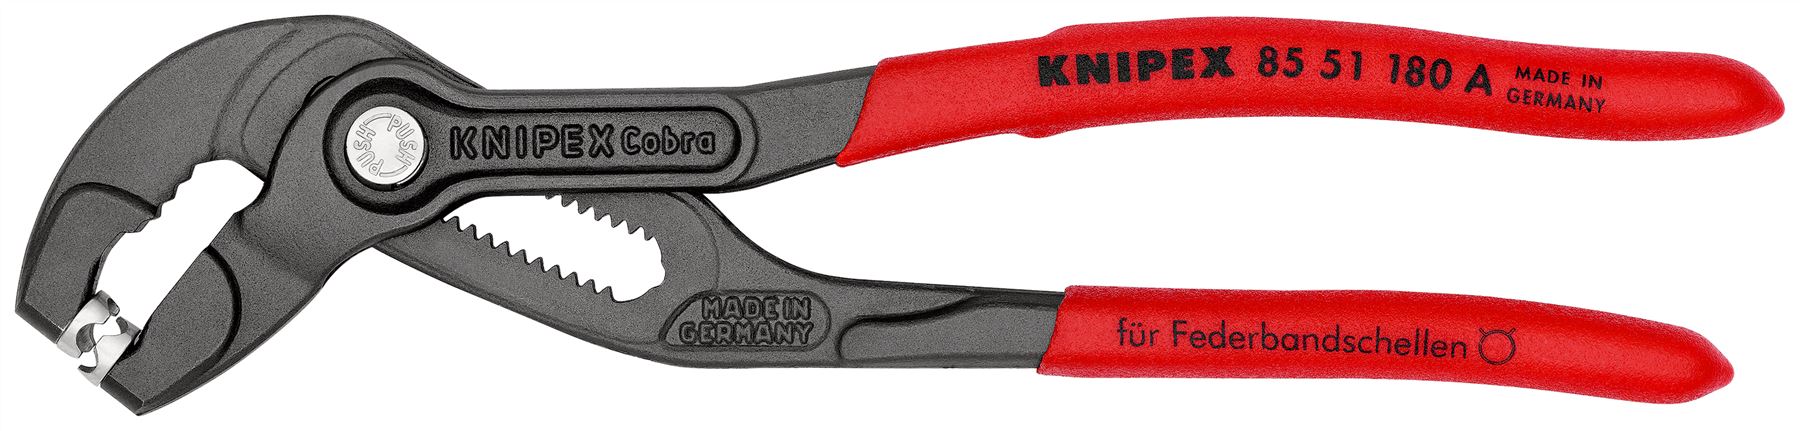 KNIPEX Spring Hose Clamp Pliers 180mm Plastic Coated Handles Non Slip 85 51 180 A